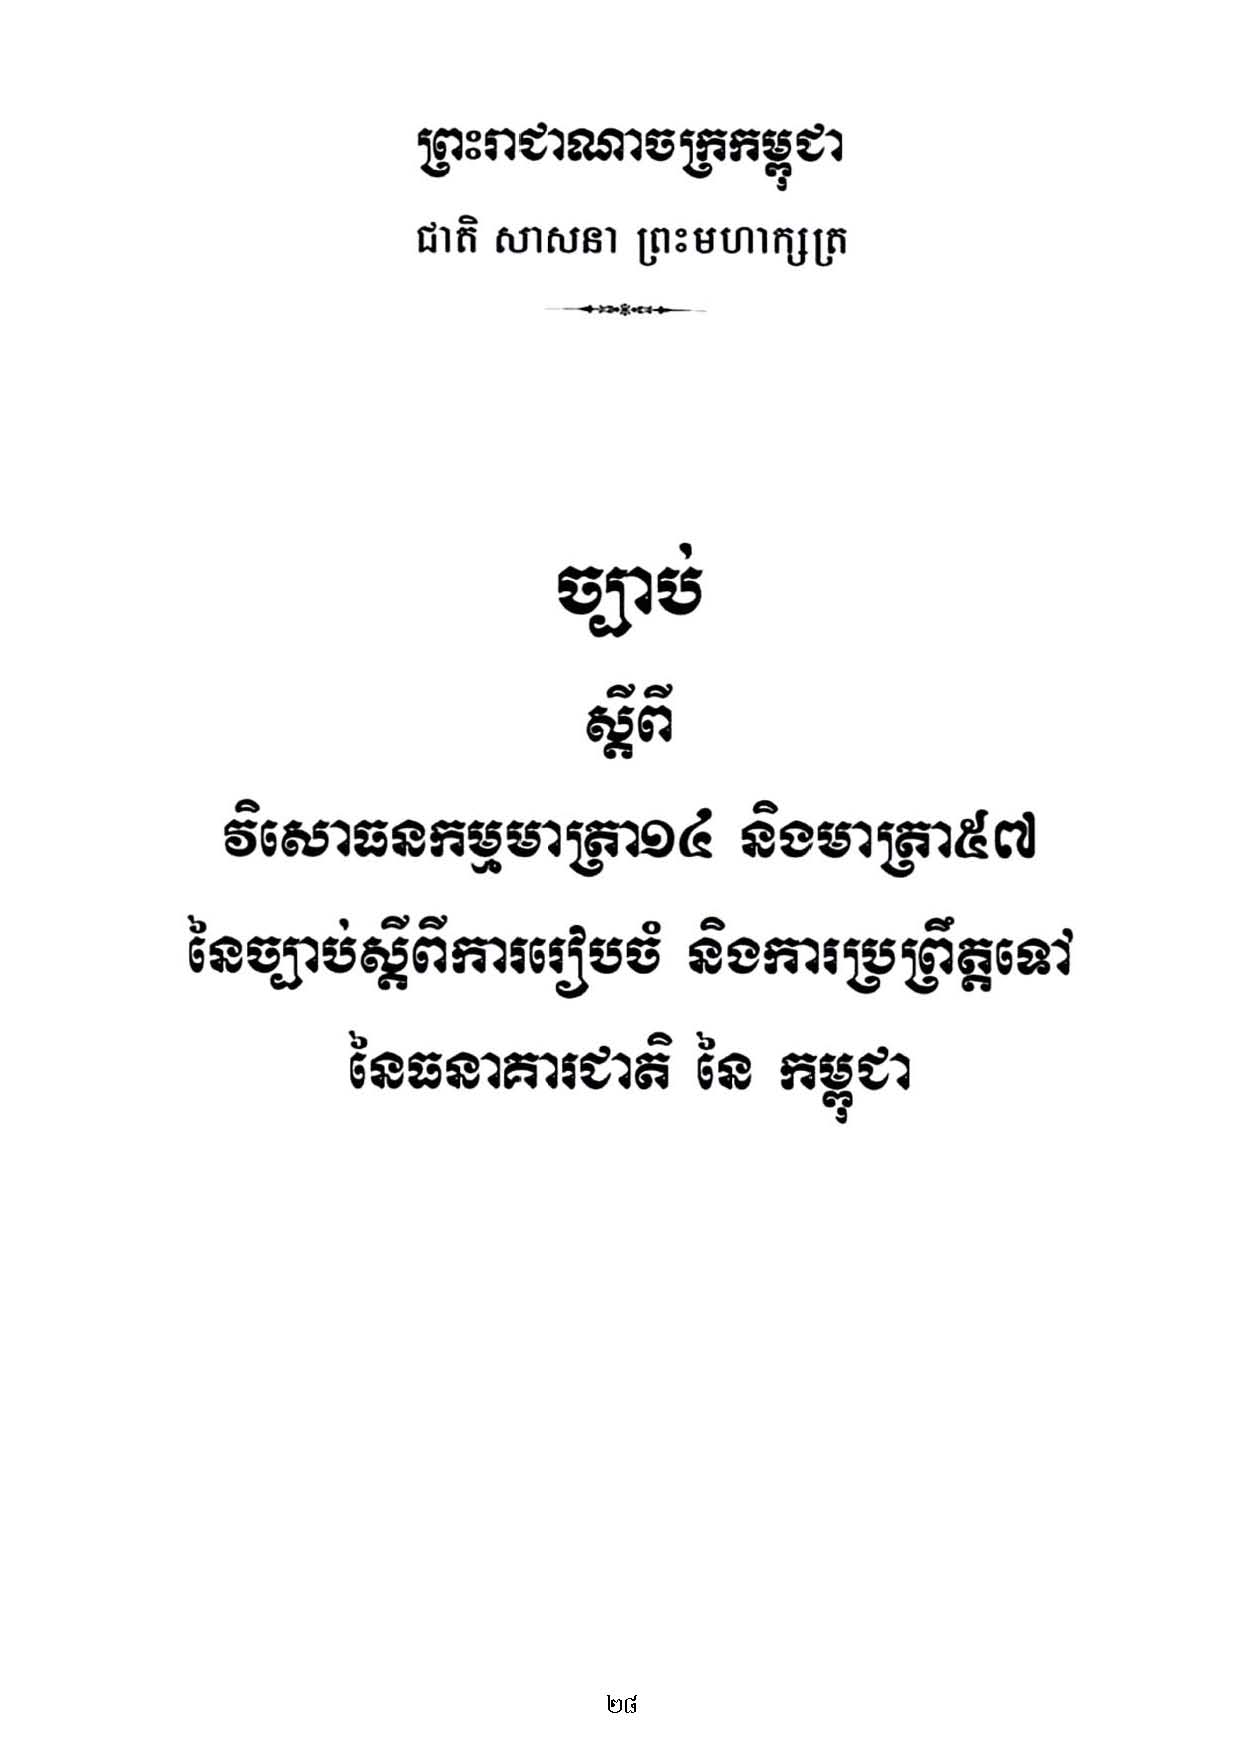 Law on the Amendent Article 14 and Article 57 of the Law on the Organization and Function of the National Bank of Cambodia(2006)